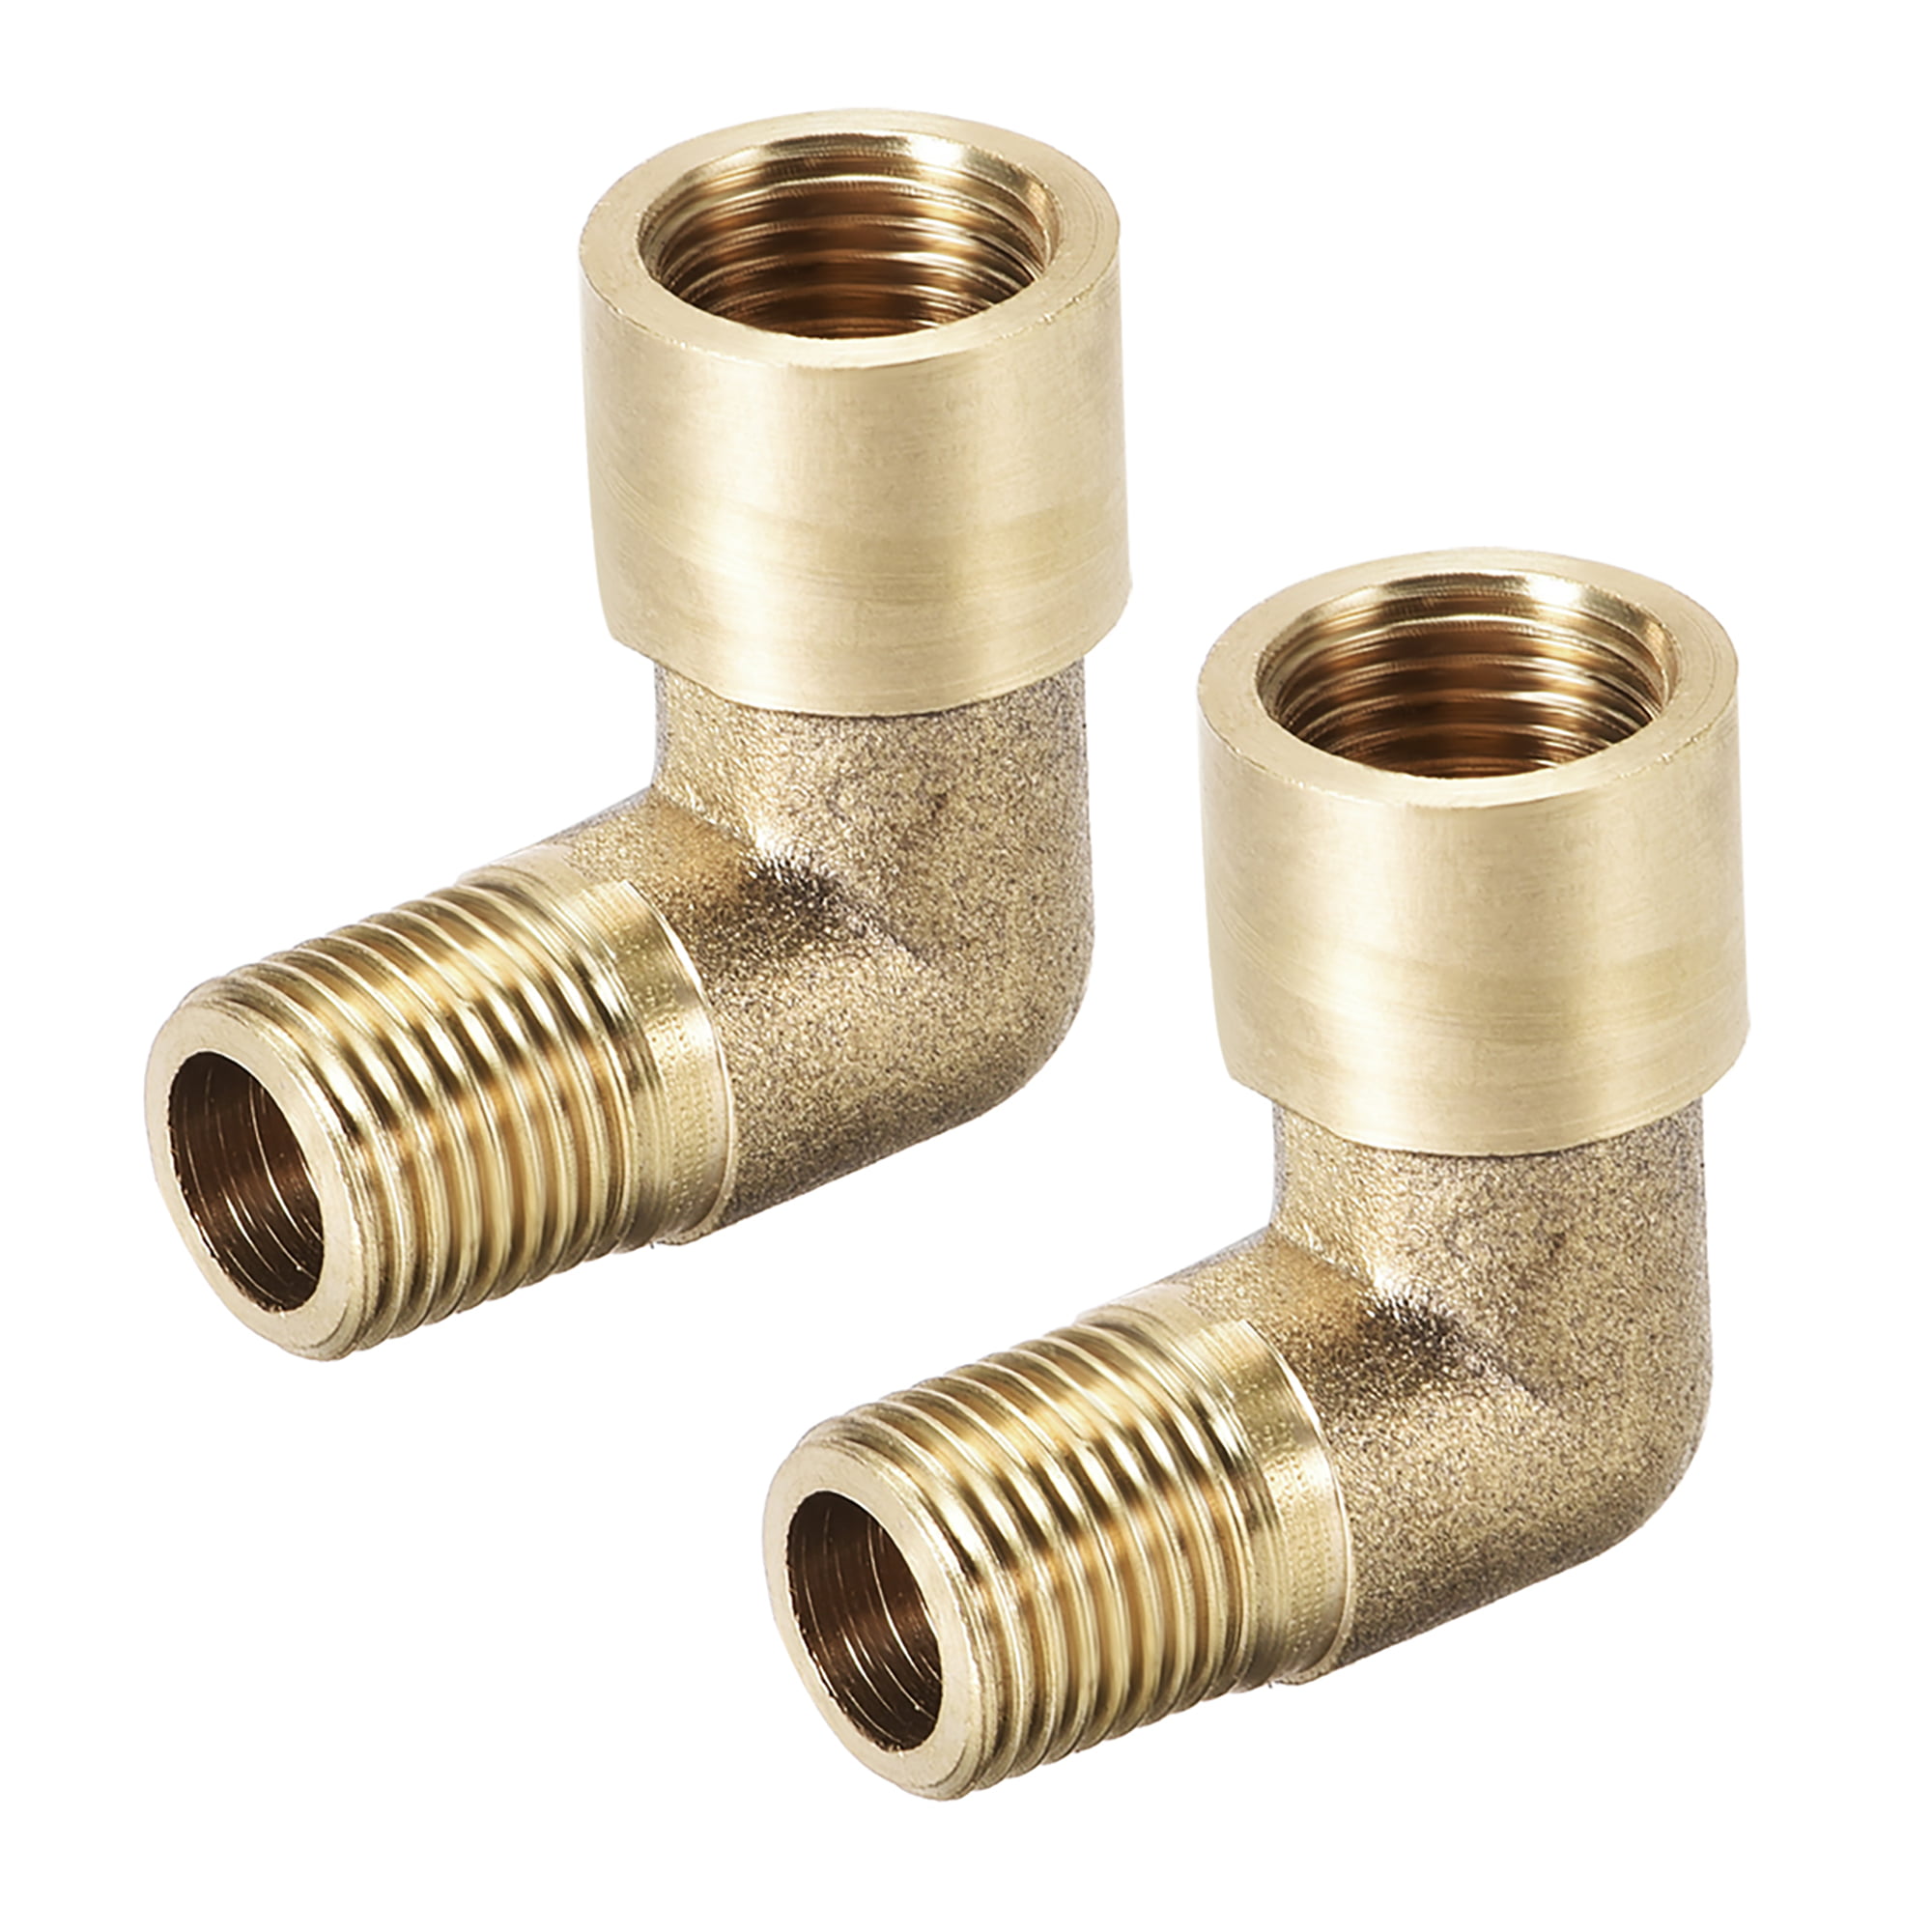 Brass Pipe Fitting 90 Degree Elbow 1/2 PT Male x 1/2 PT Female 2pcs 